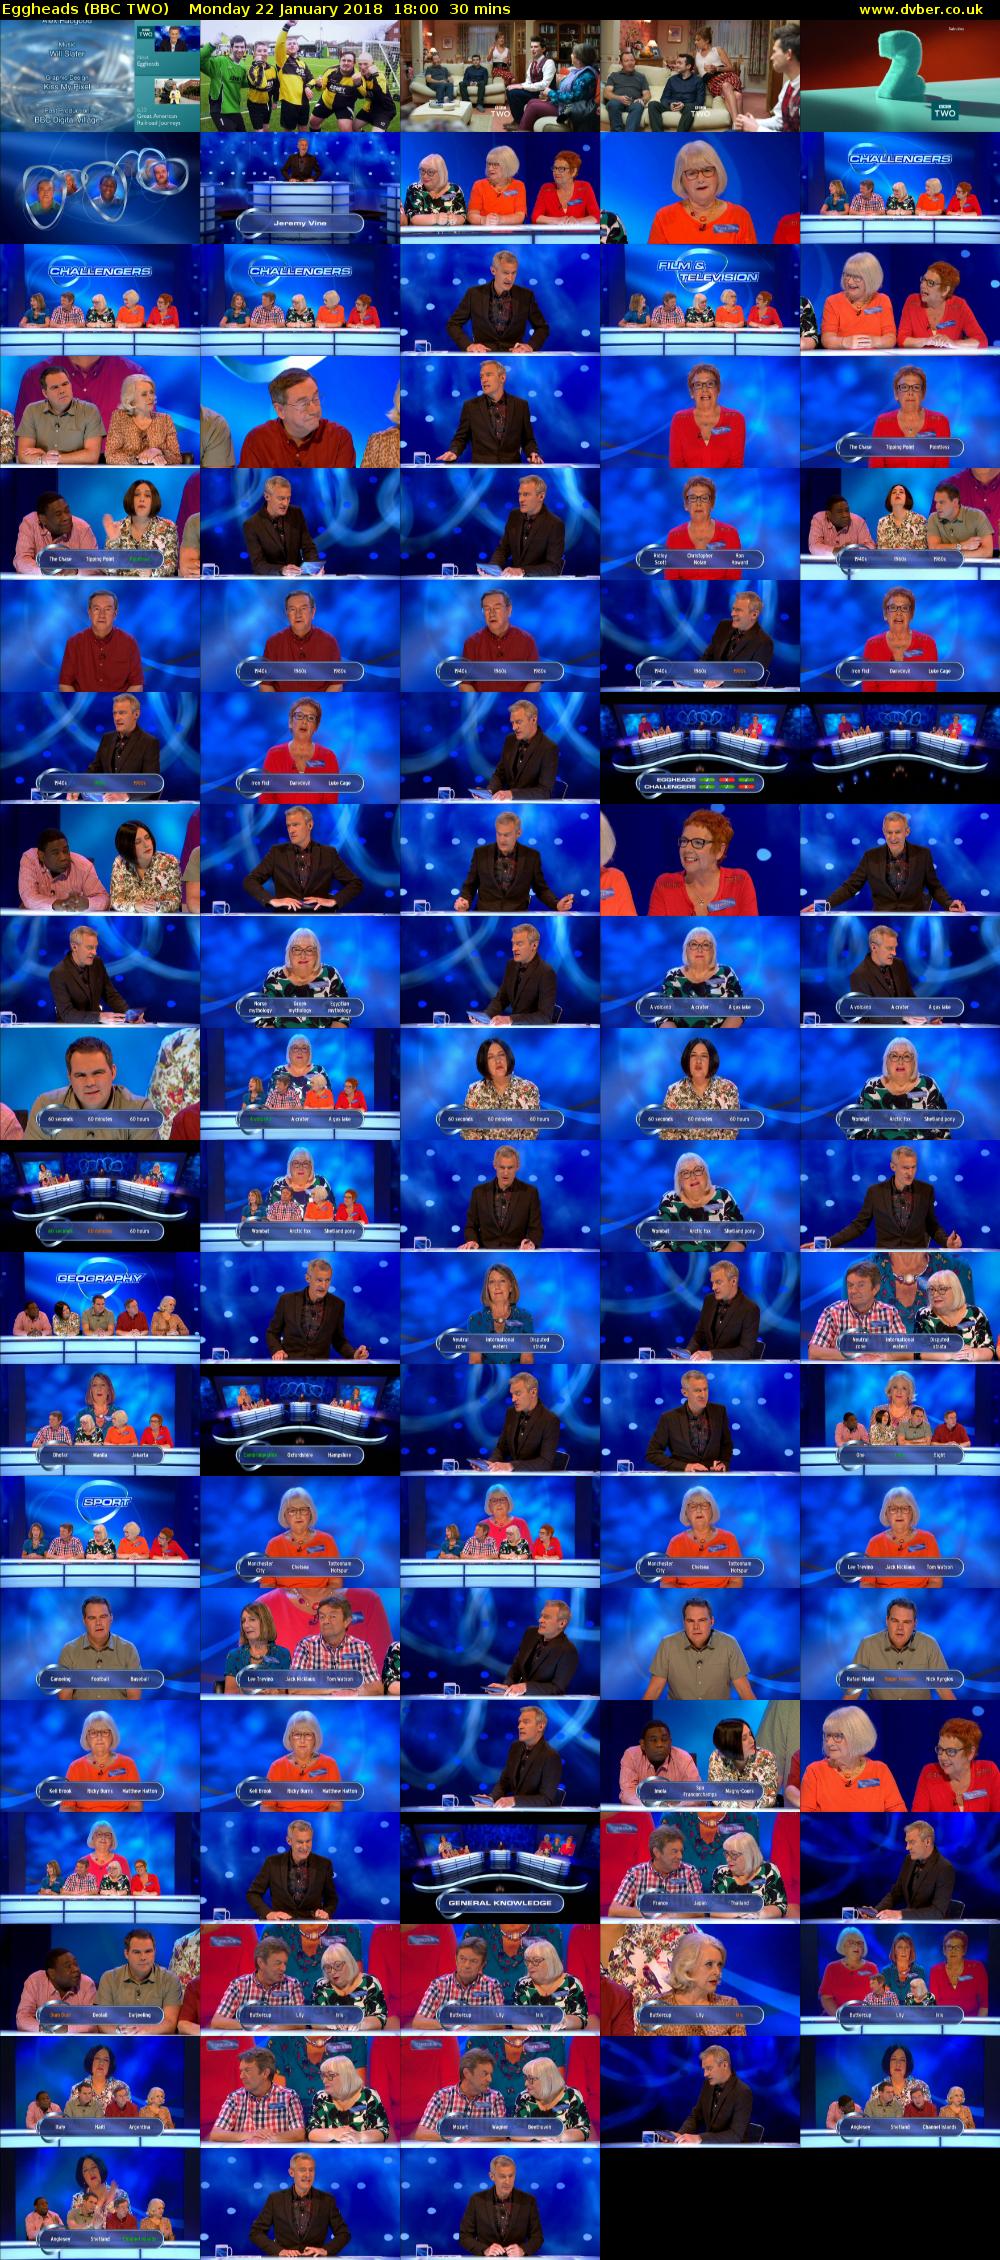 Eggheads (BBC TWO) Monday 22 January 2018 18:00 - 18:30